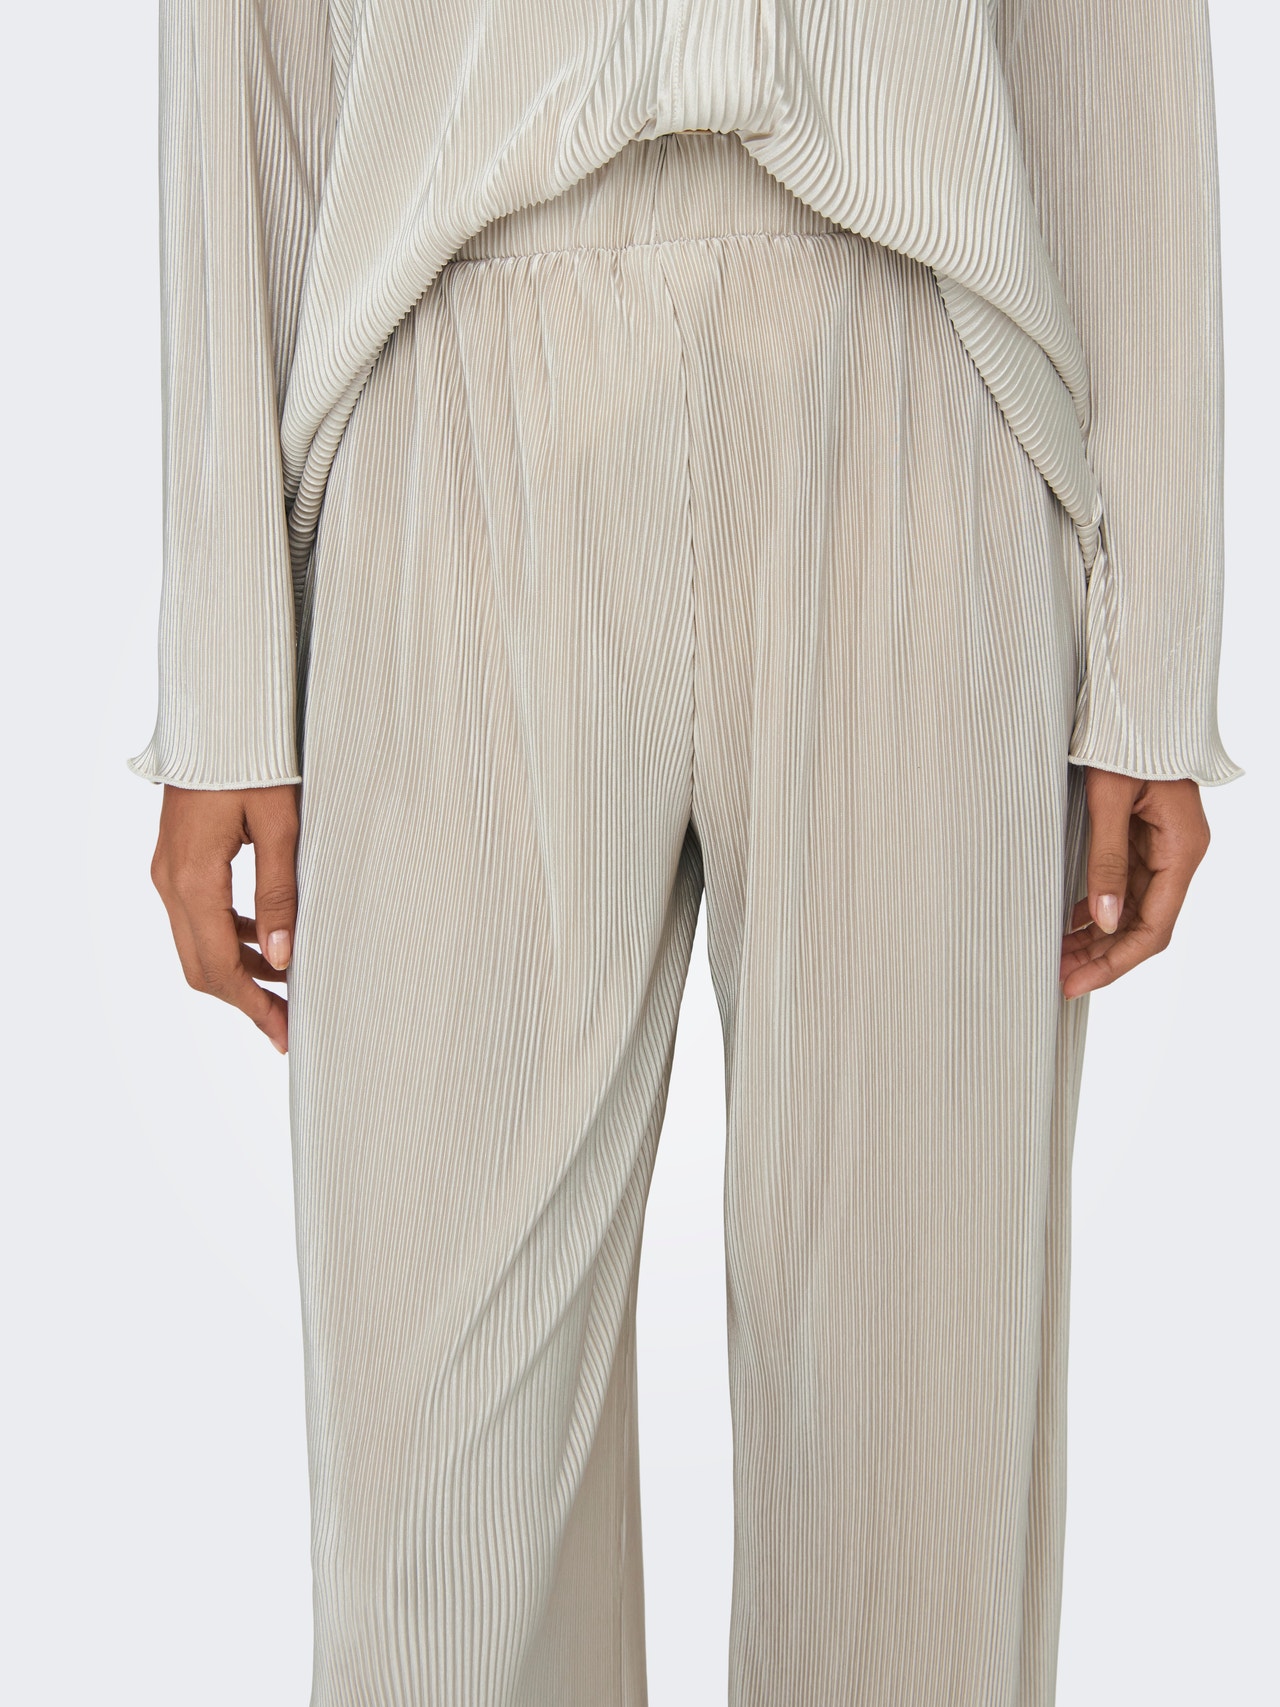 ONLY wide trousers with mid waist -Sandshell - 15295564